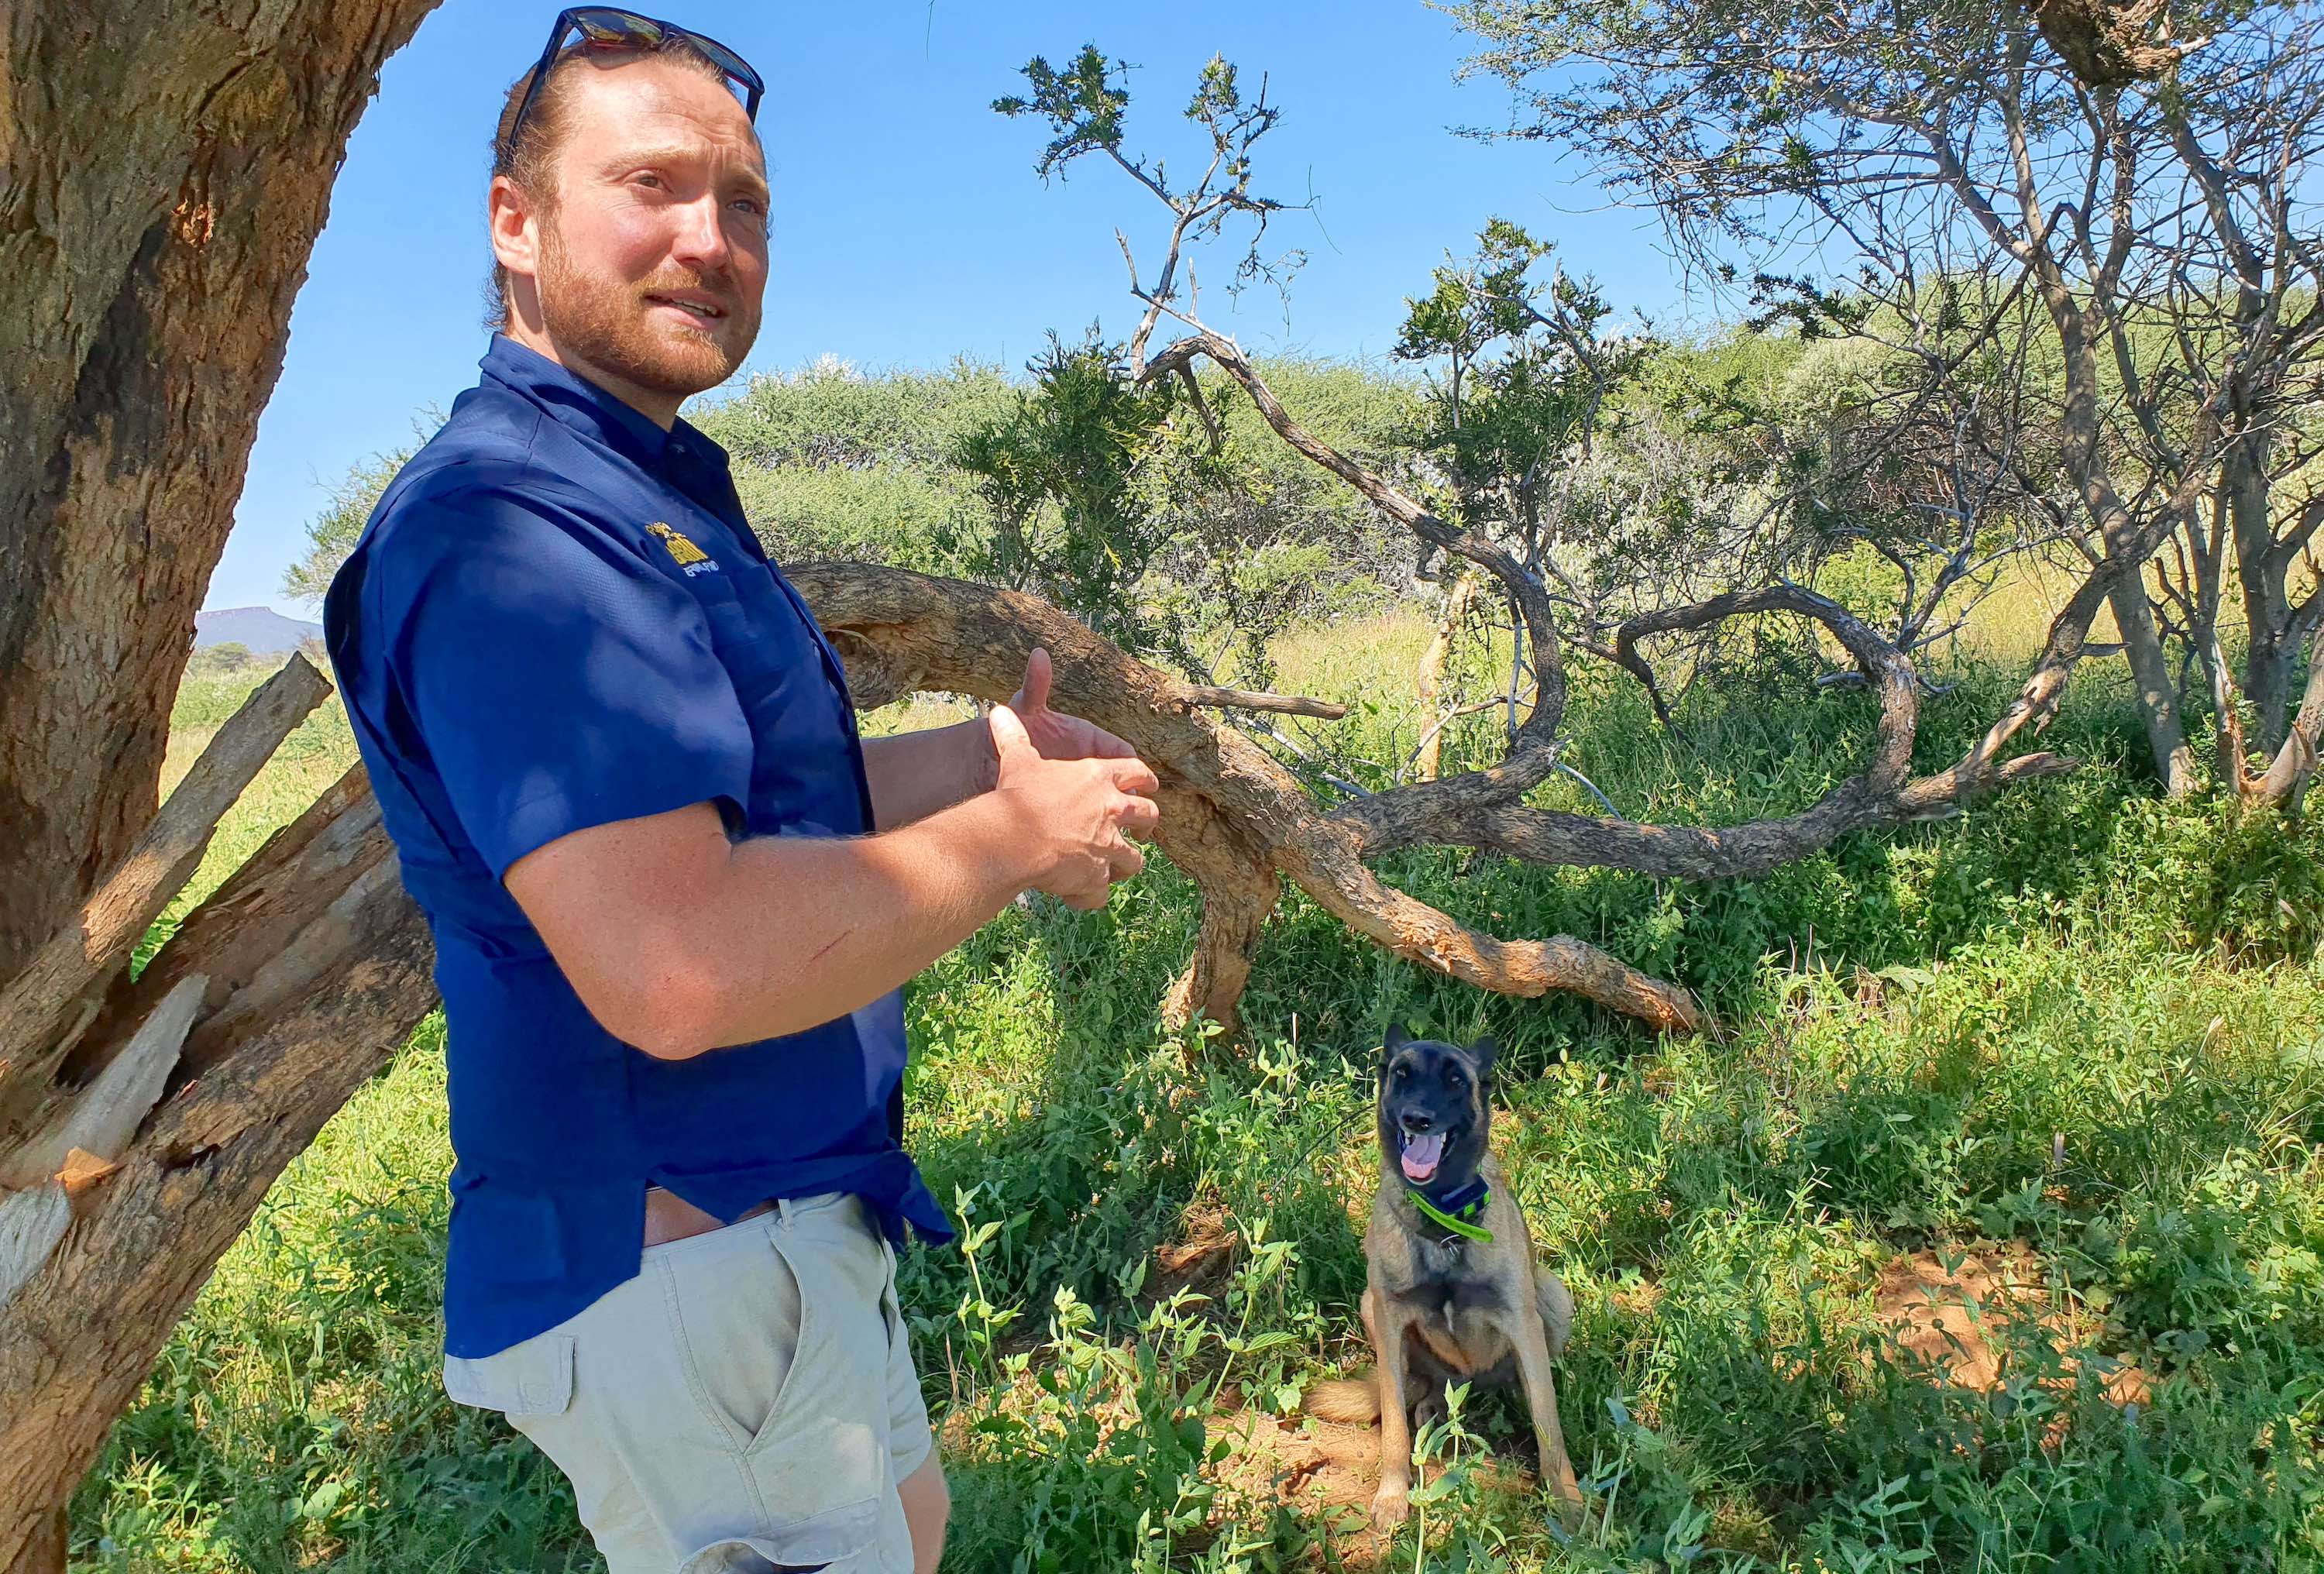 A man in a blue shirt and a Belgian Malinois dog next to a tree.